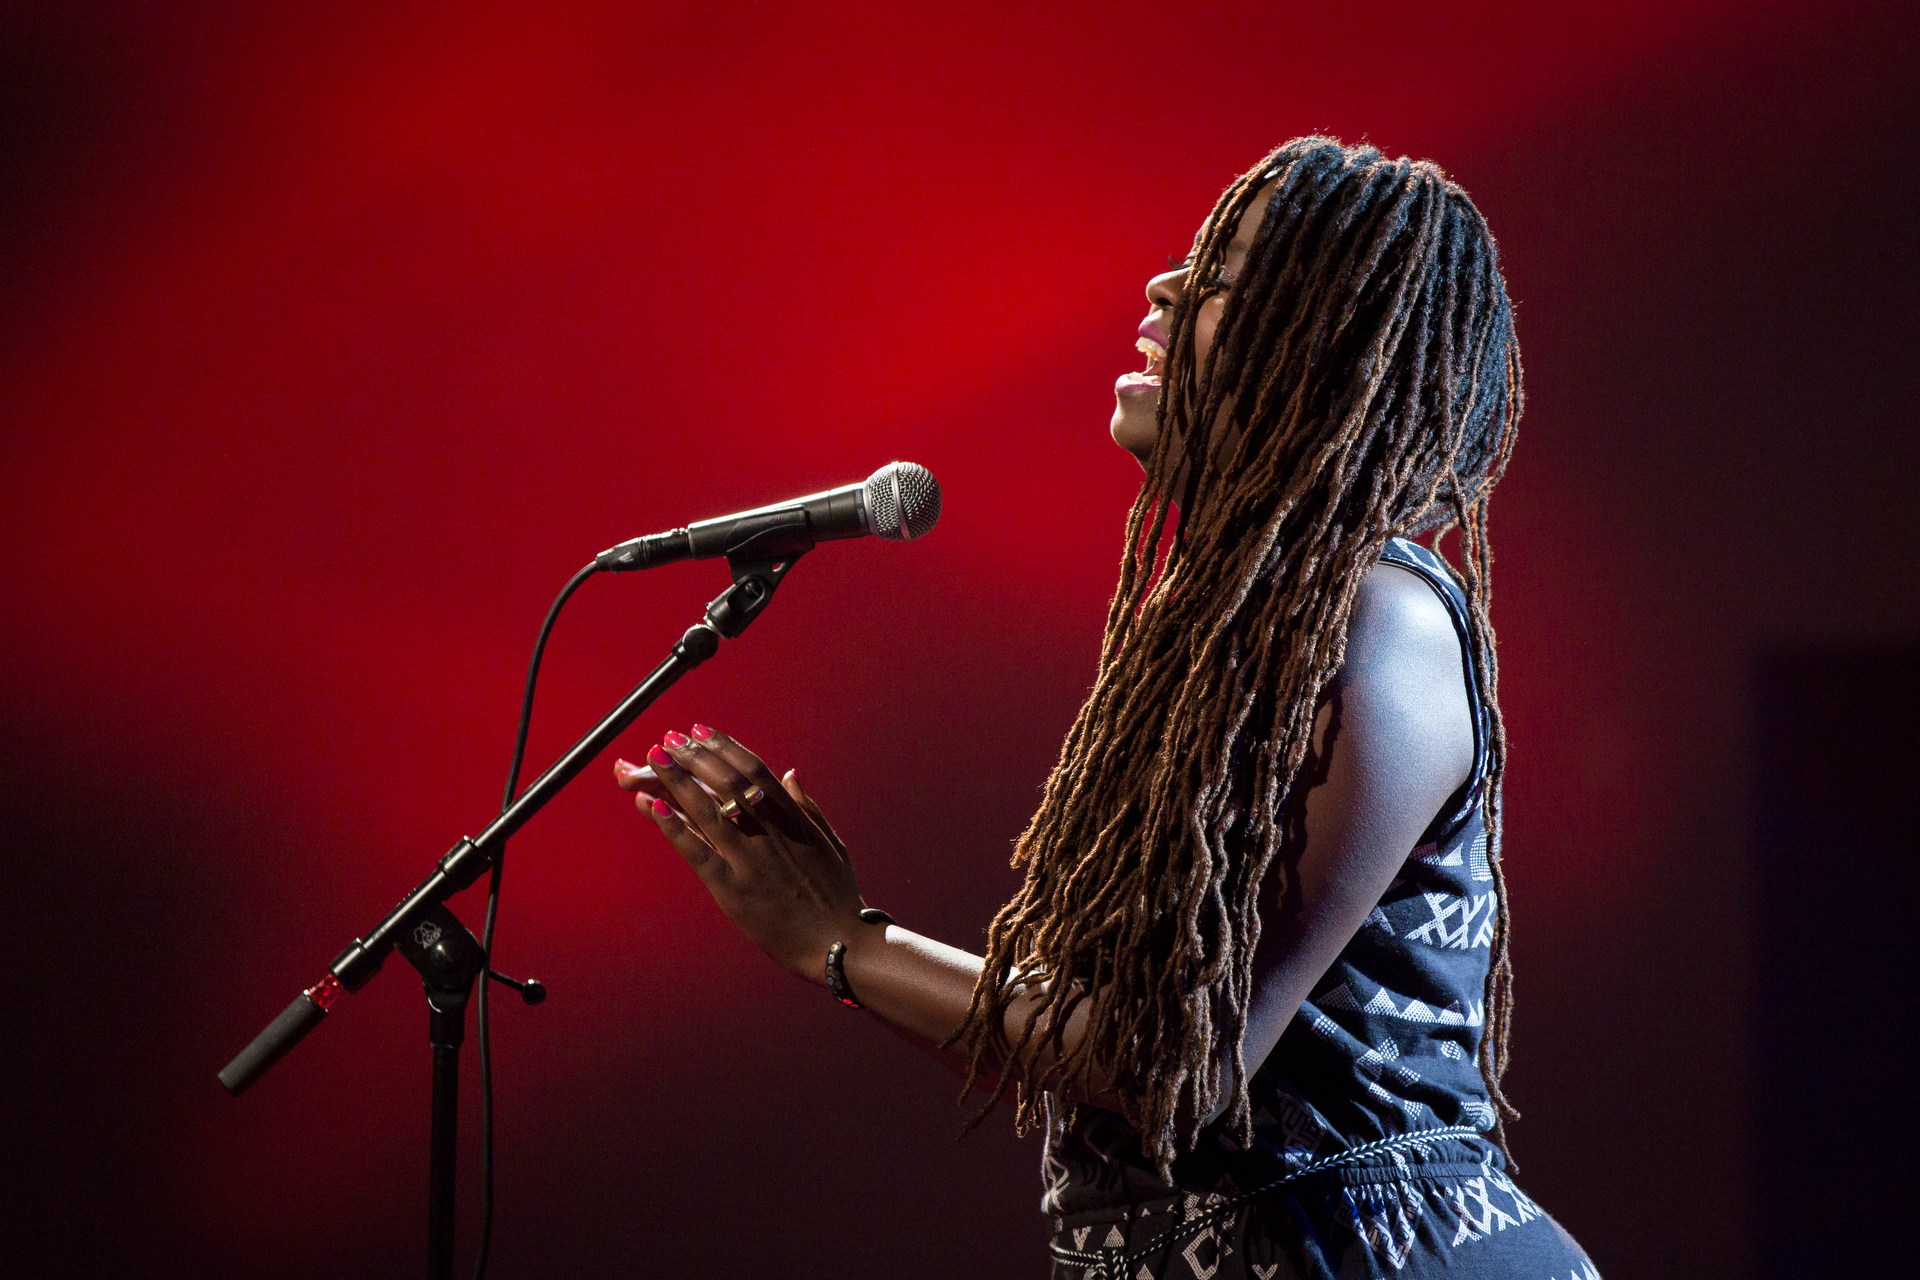 Somi performs at TEDWomen2015 - Momentum, Session 5, May 28, 2015, Monterey Conference Center, Monterey, California, USA. Photo: Marla Aufmuth/TED